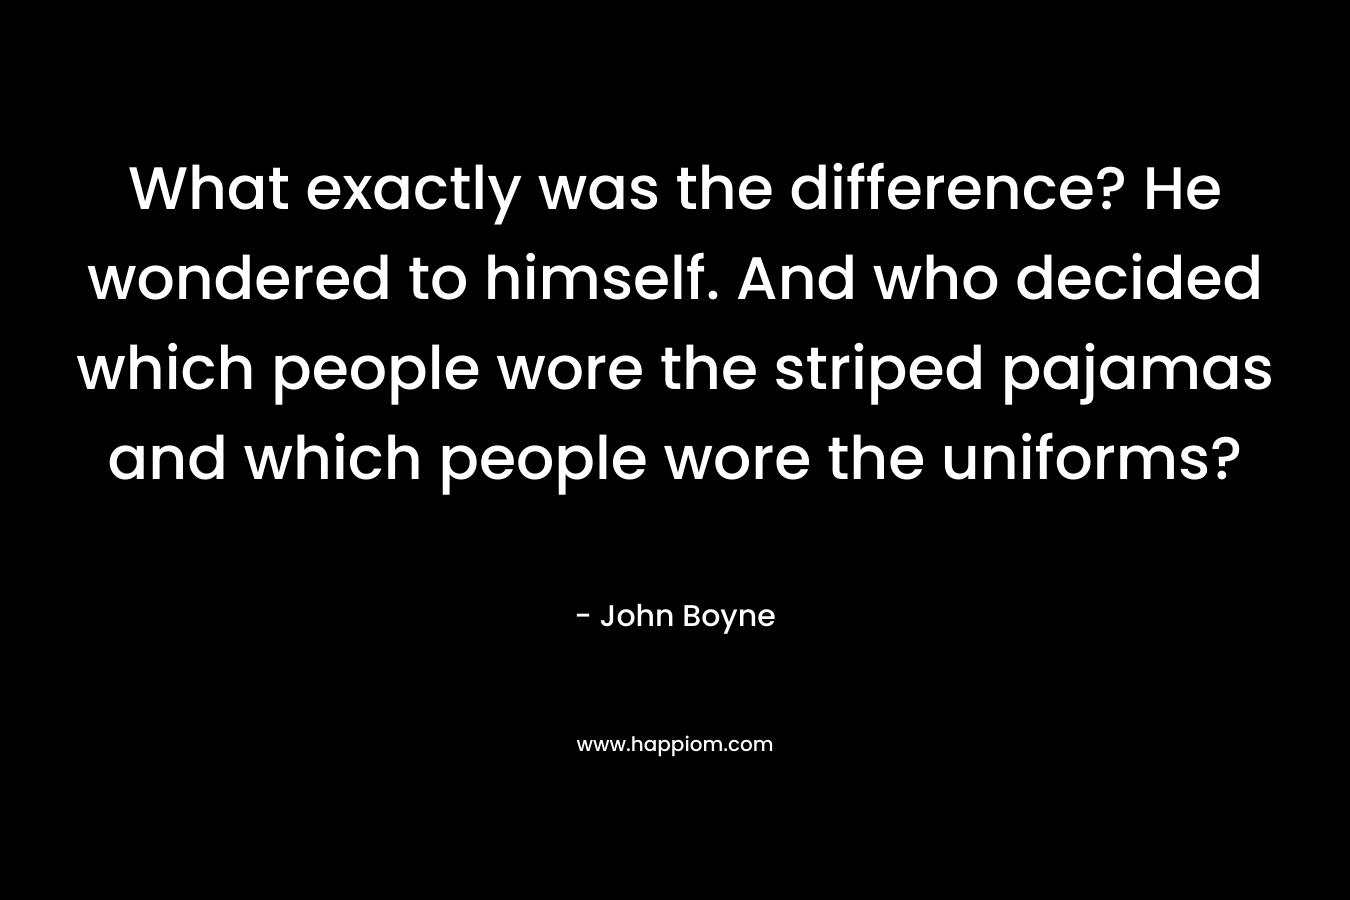 What exactly was the difference? He wondered to himself. And who decided which people wore the striped pajamas and which people wore the uniforms?